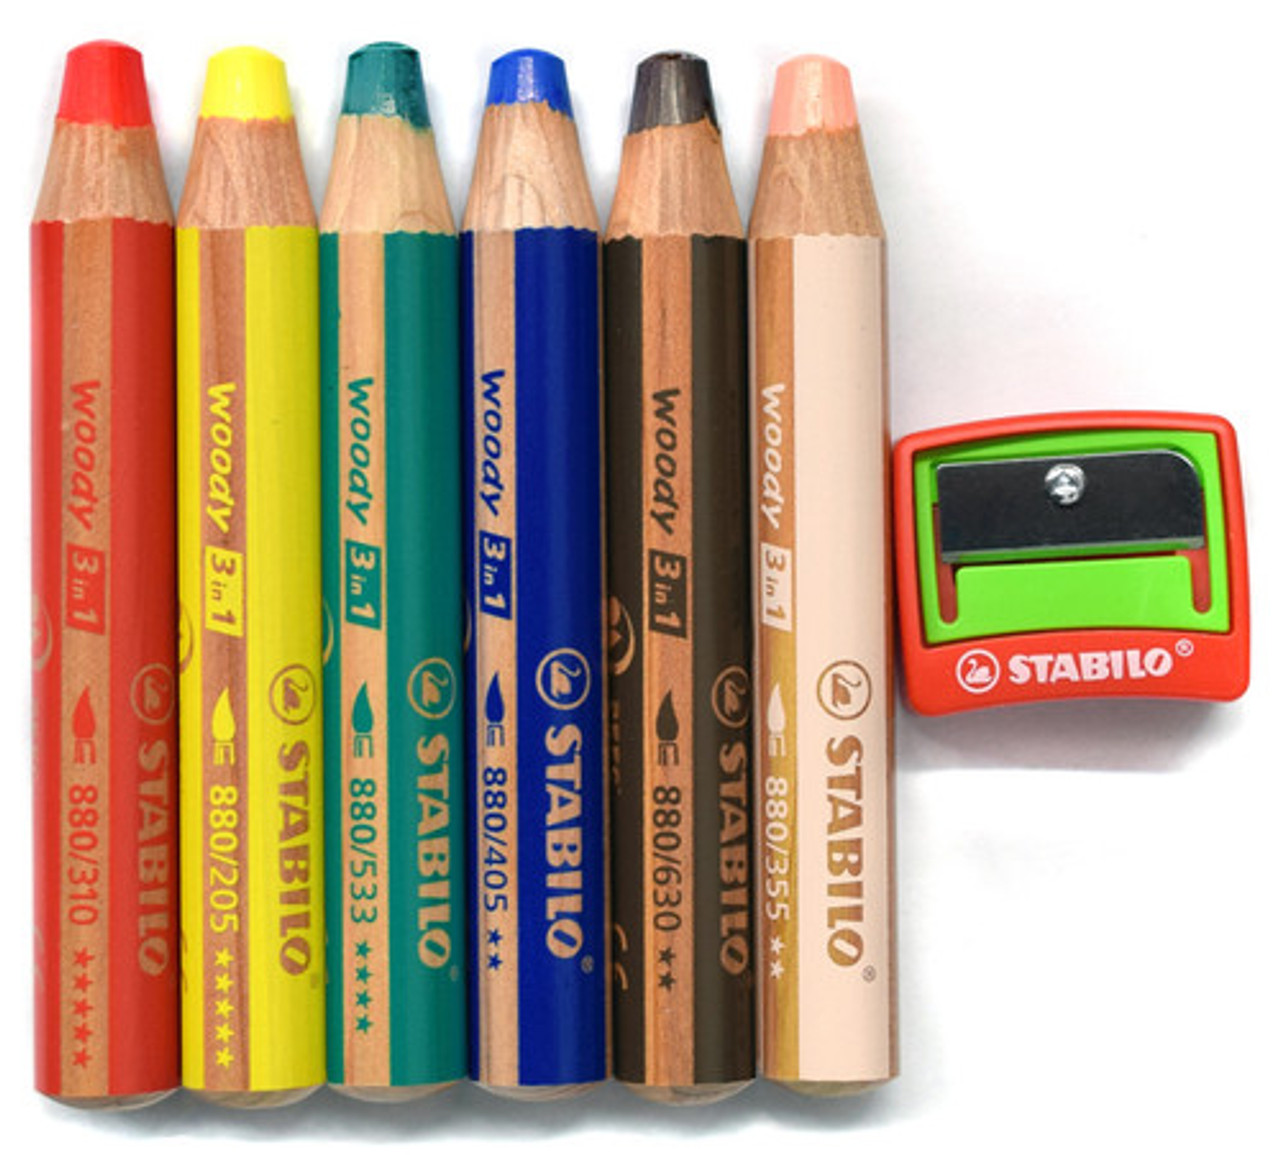 STABILO Woody 3 in 1, Set of 6 with Sharpener